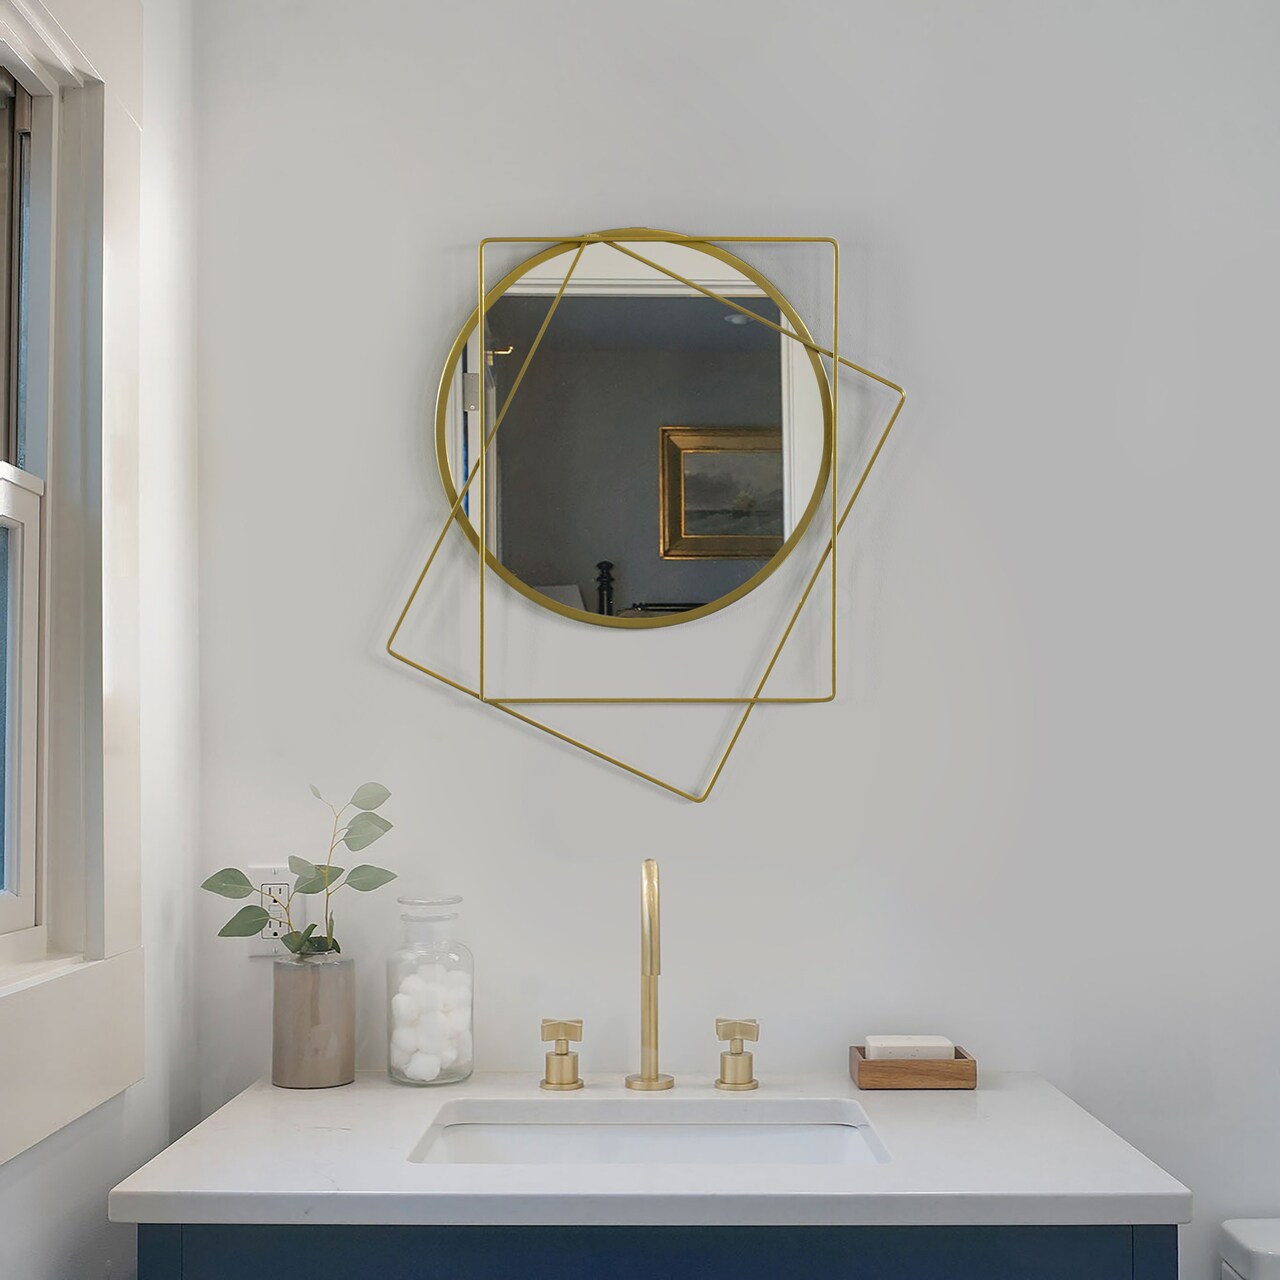 Uniquewise Decorative Shaped Metal Frame Wall Mounted Modern Mirrors